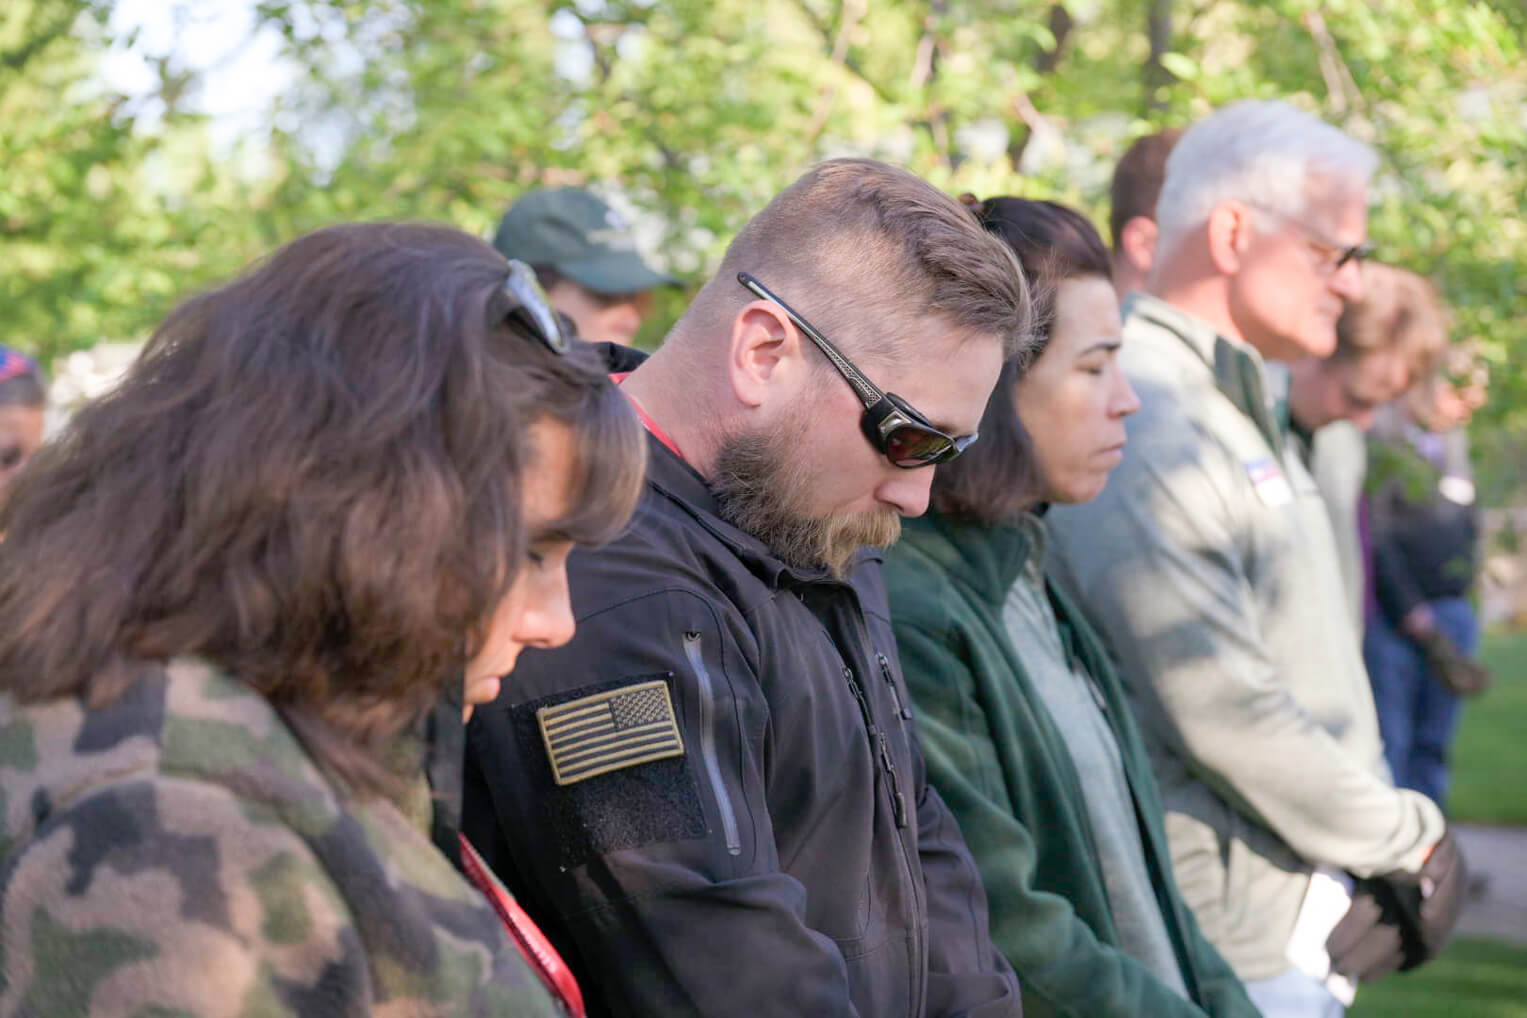 Couples were led by chaplains in a special Memorial Day remembrance service at Samaritan Lodge.